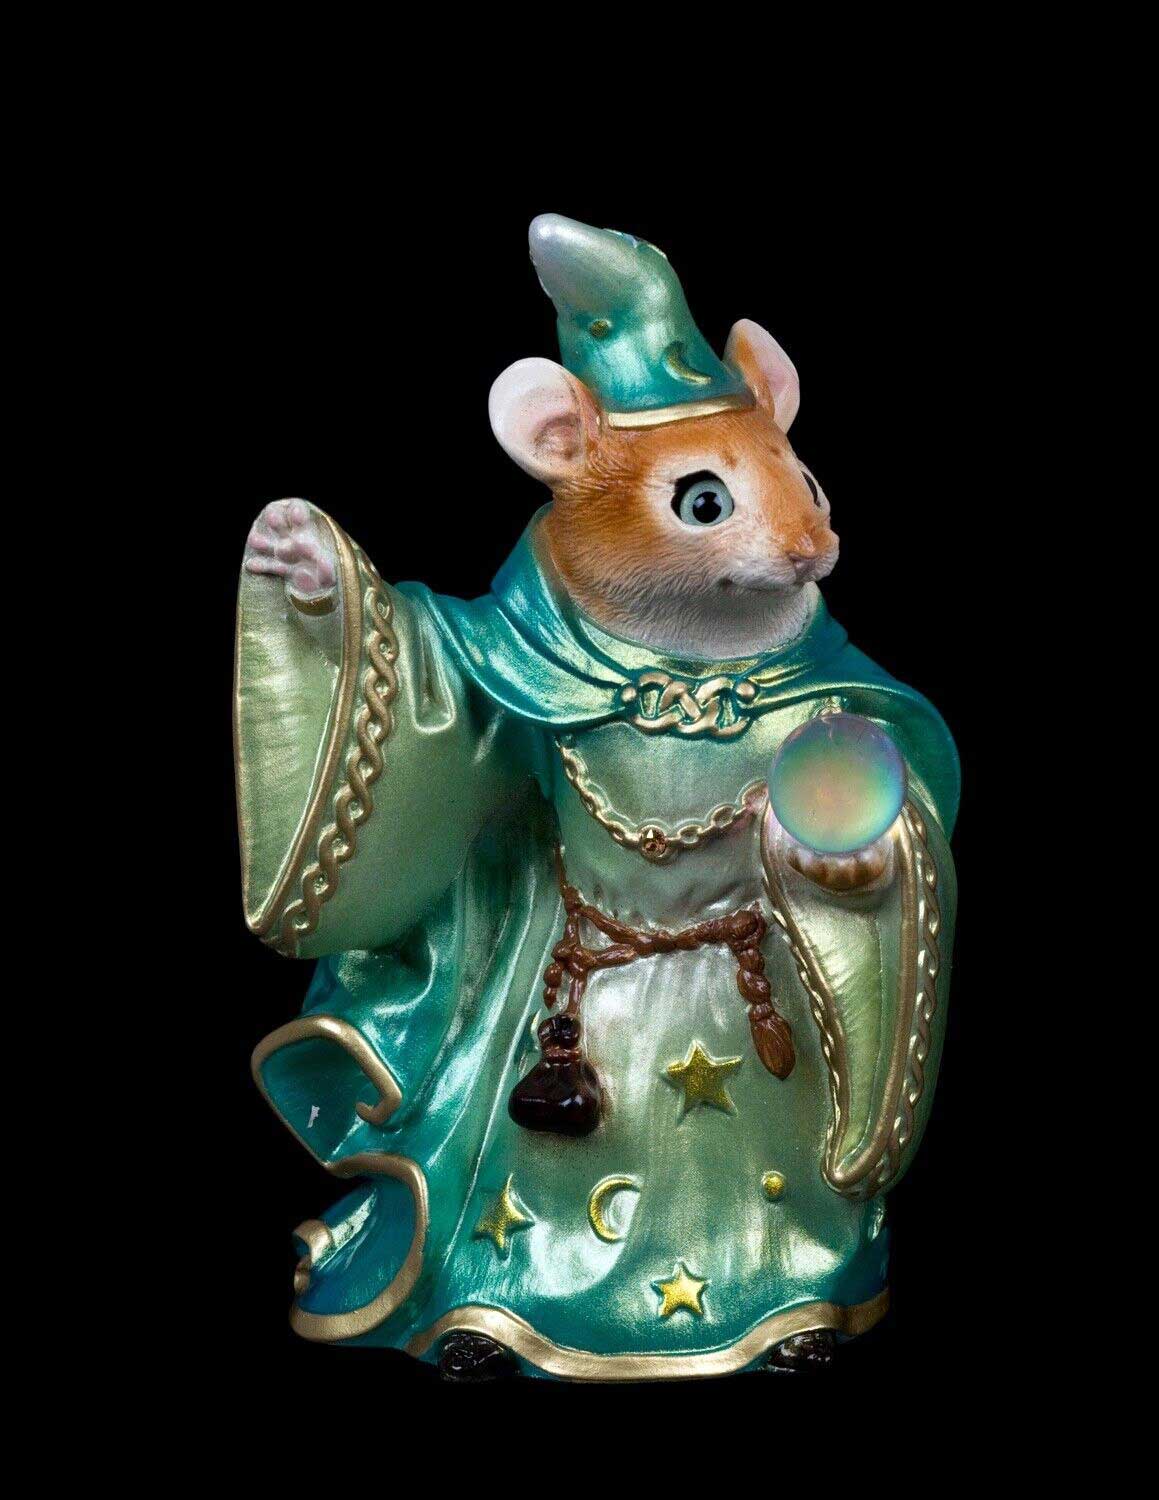 20230315-Seaglass-Mouse-Wizard-Test-Paint-1-by-Gina